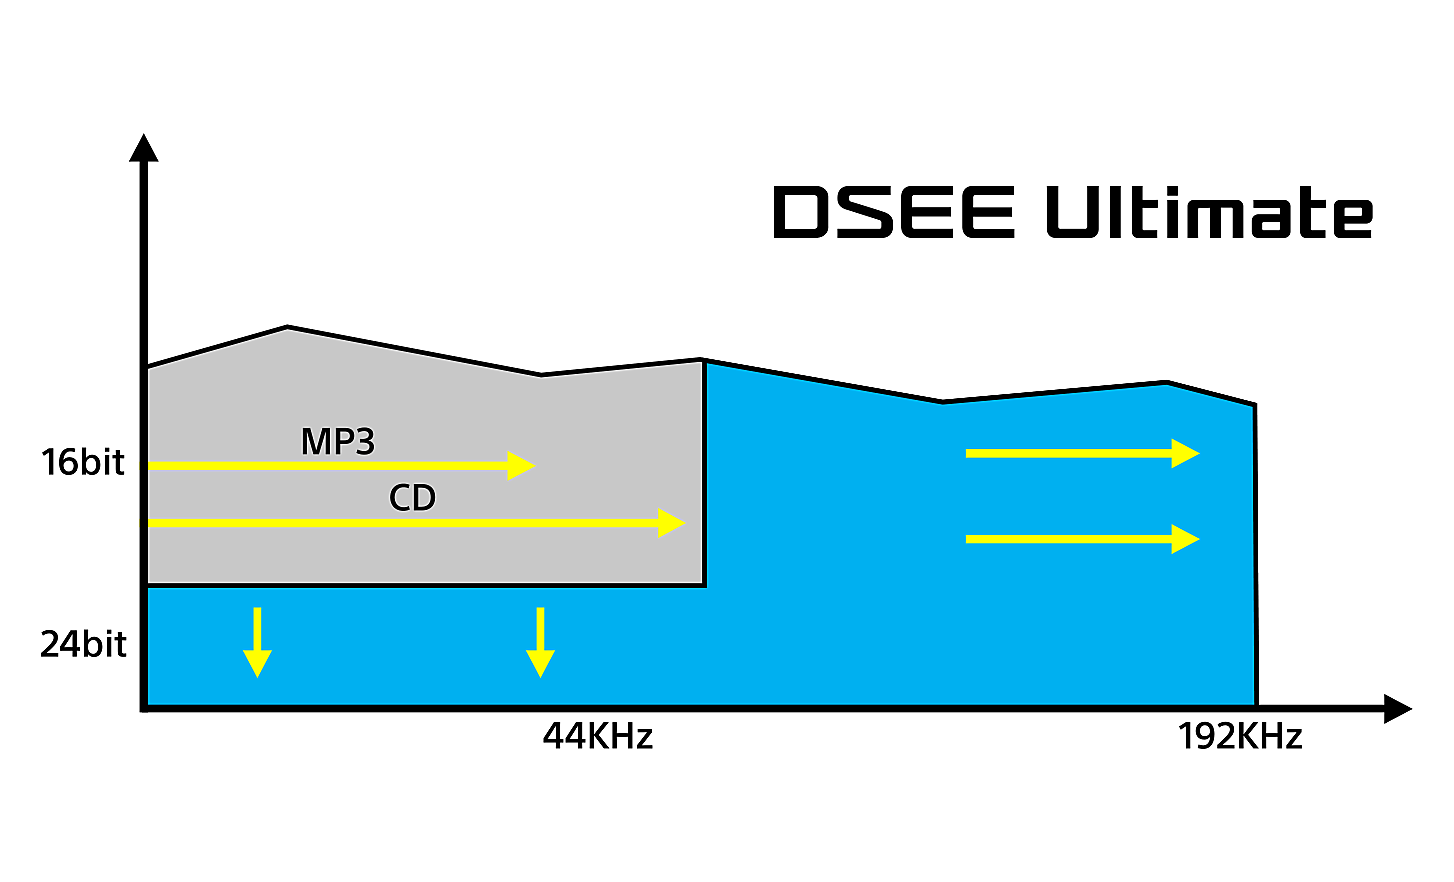 Graph illustrating the effects of DSEE Ultimate on digital music